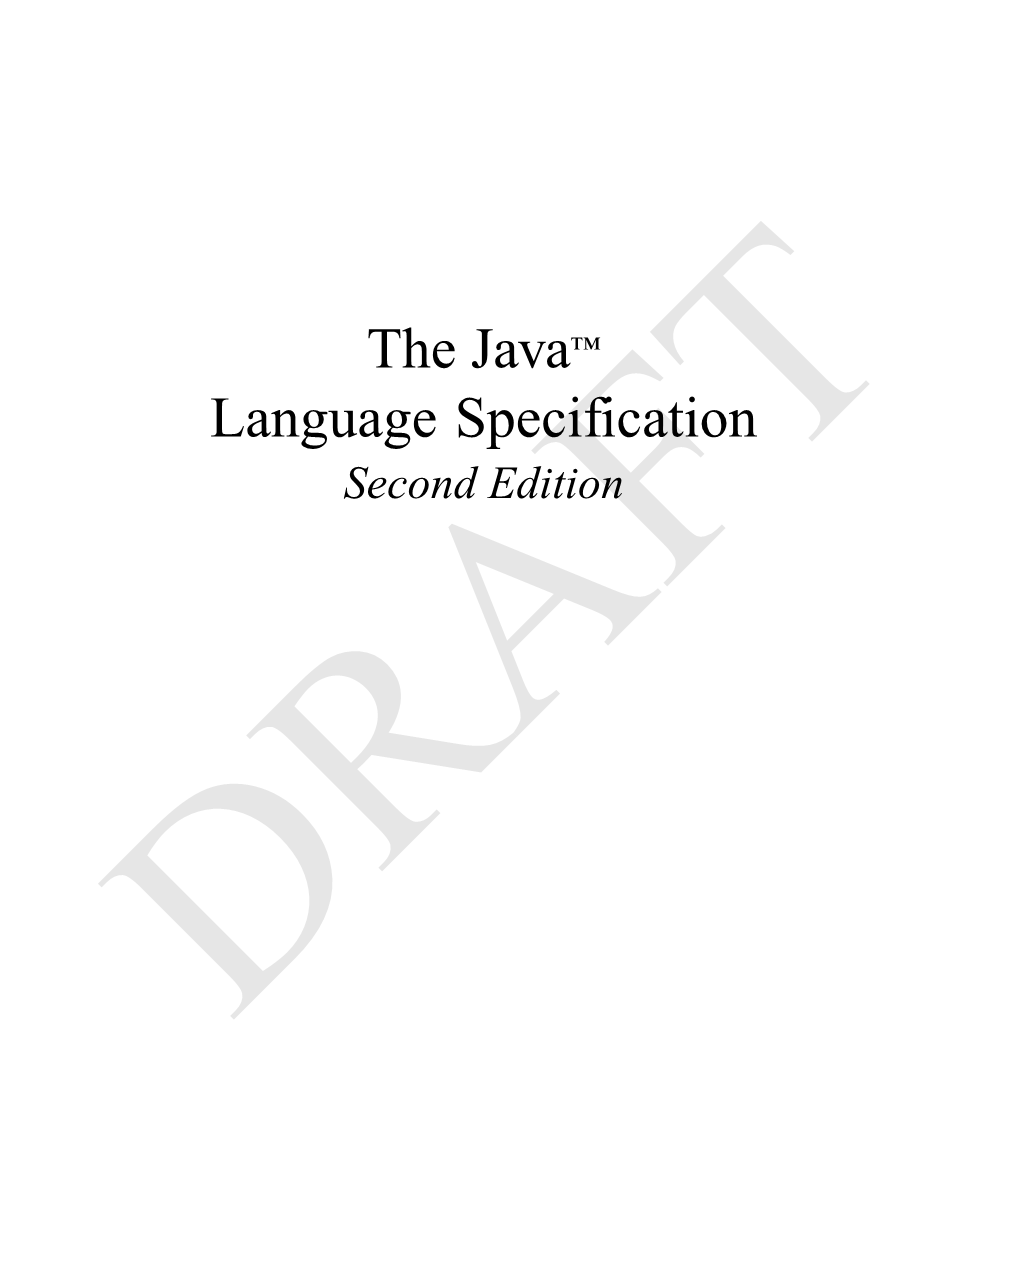 The Java™ Language Specification Second Edition